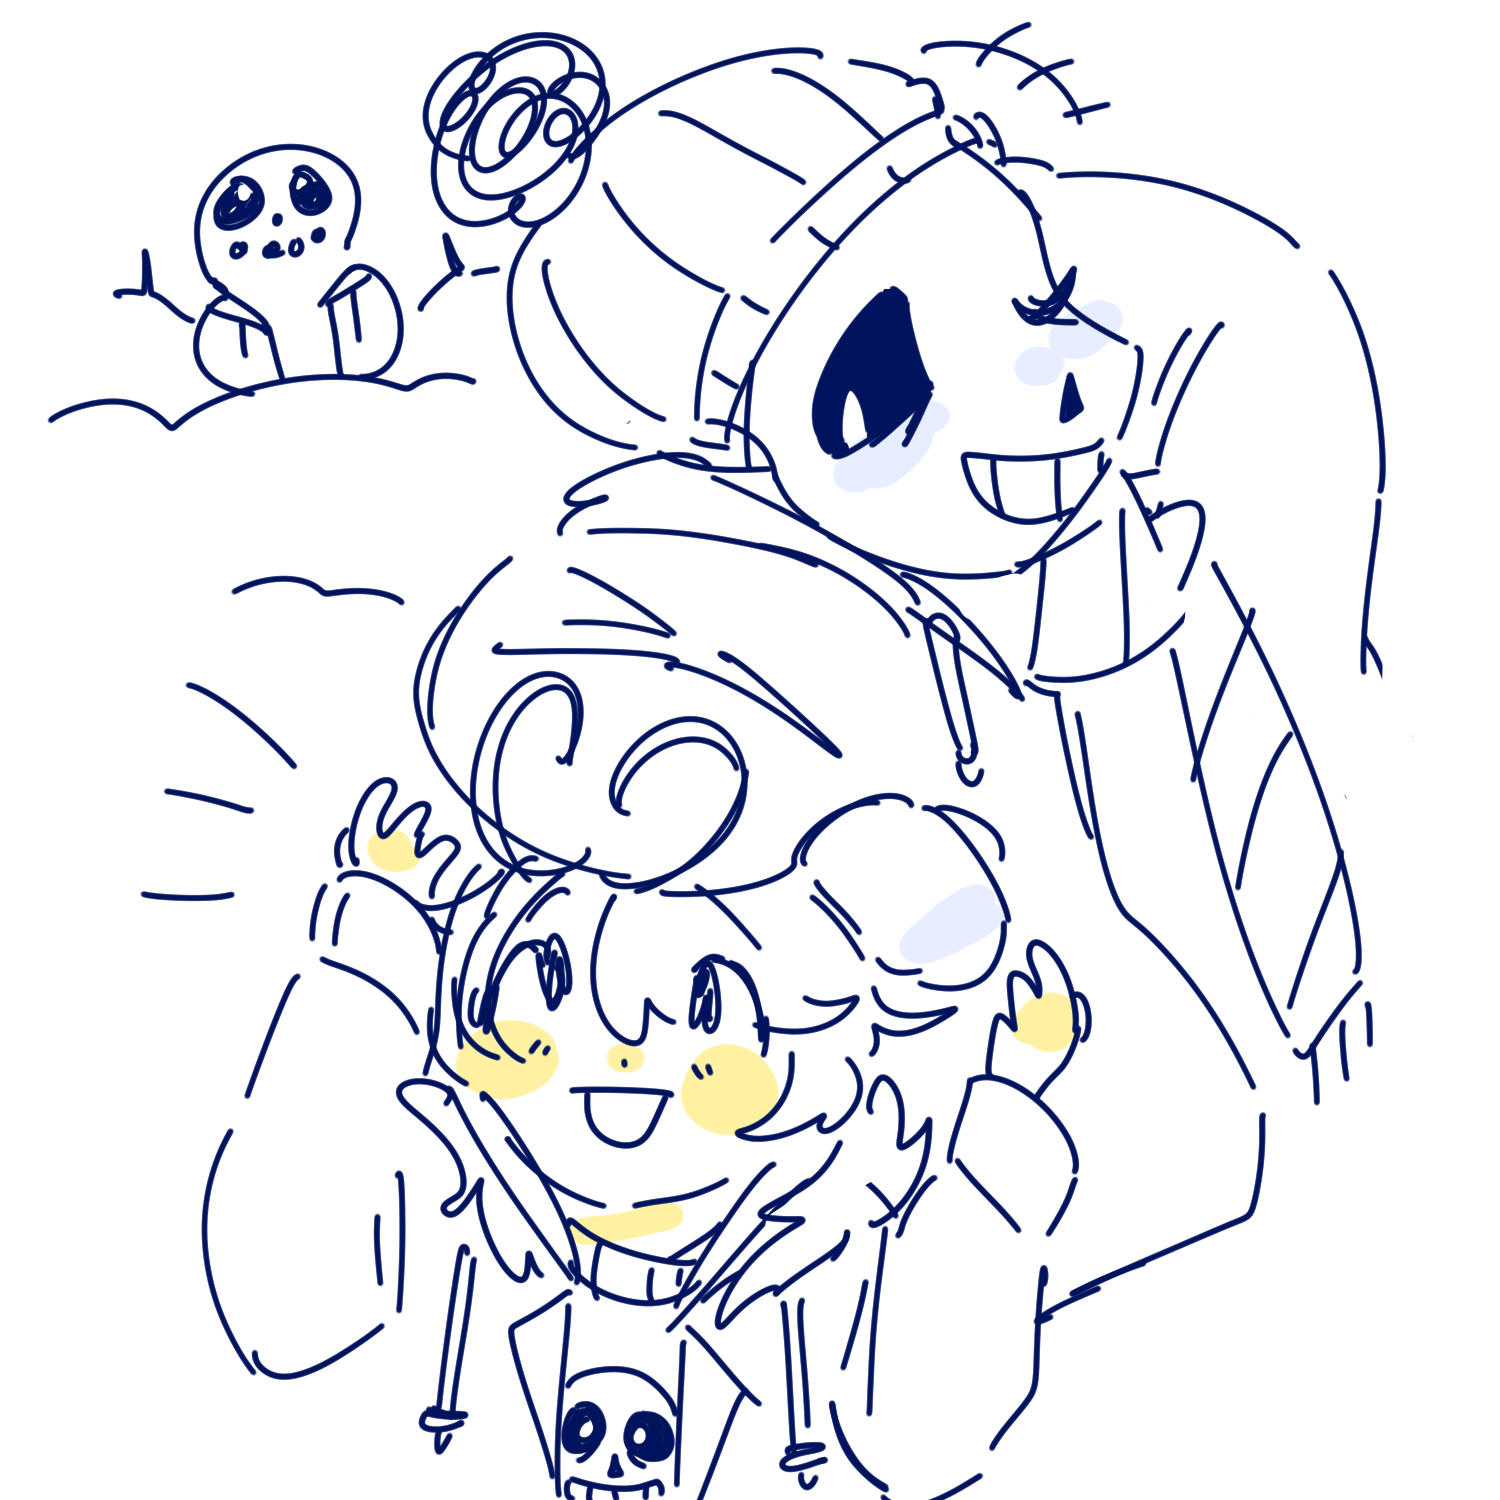 Sans and Gokiburi-chan play in the snow